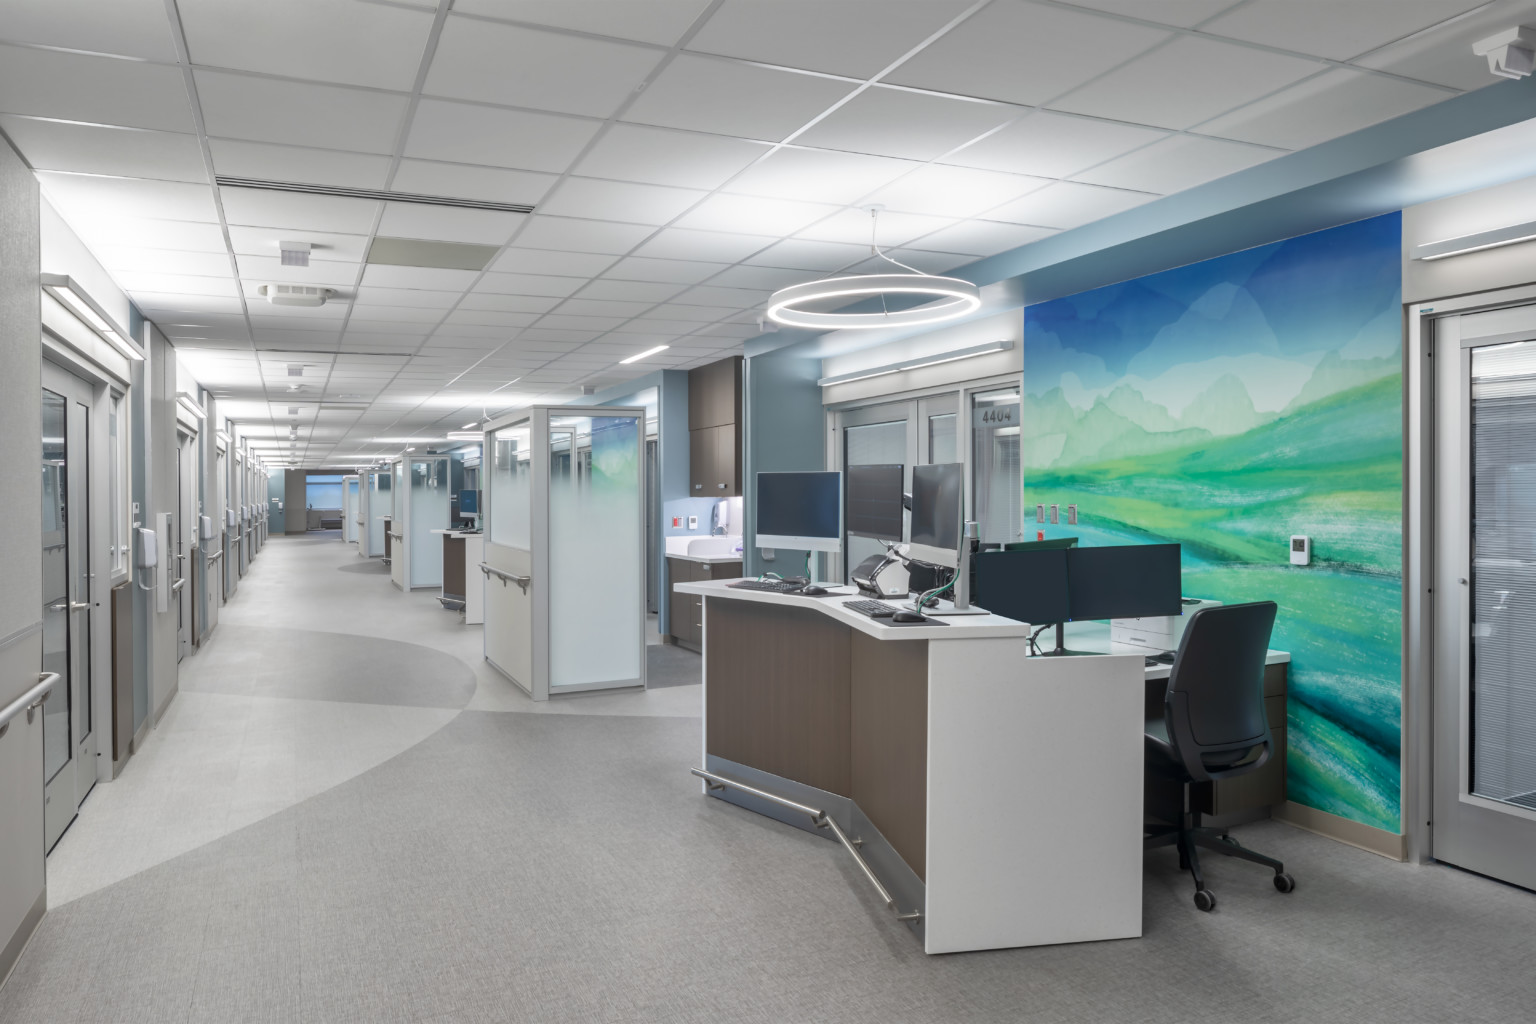 Hospital corridor with angled desk with multiple monitors in front of abstract blue and green mural. Glass partitions beyond